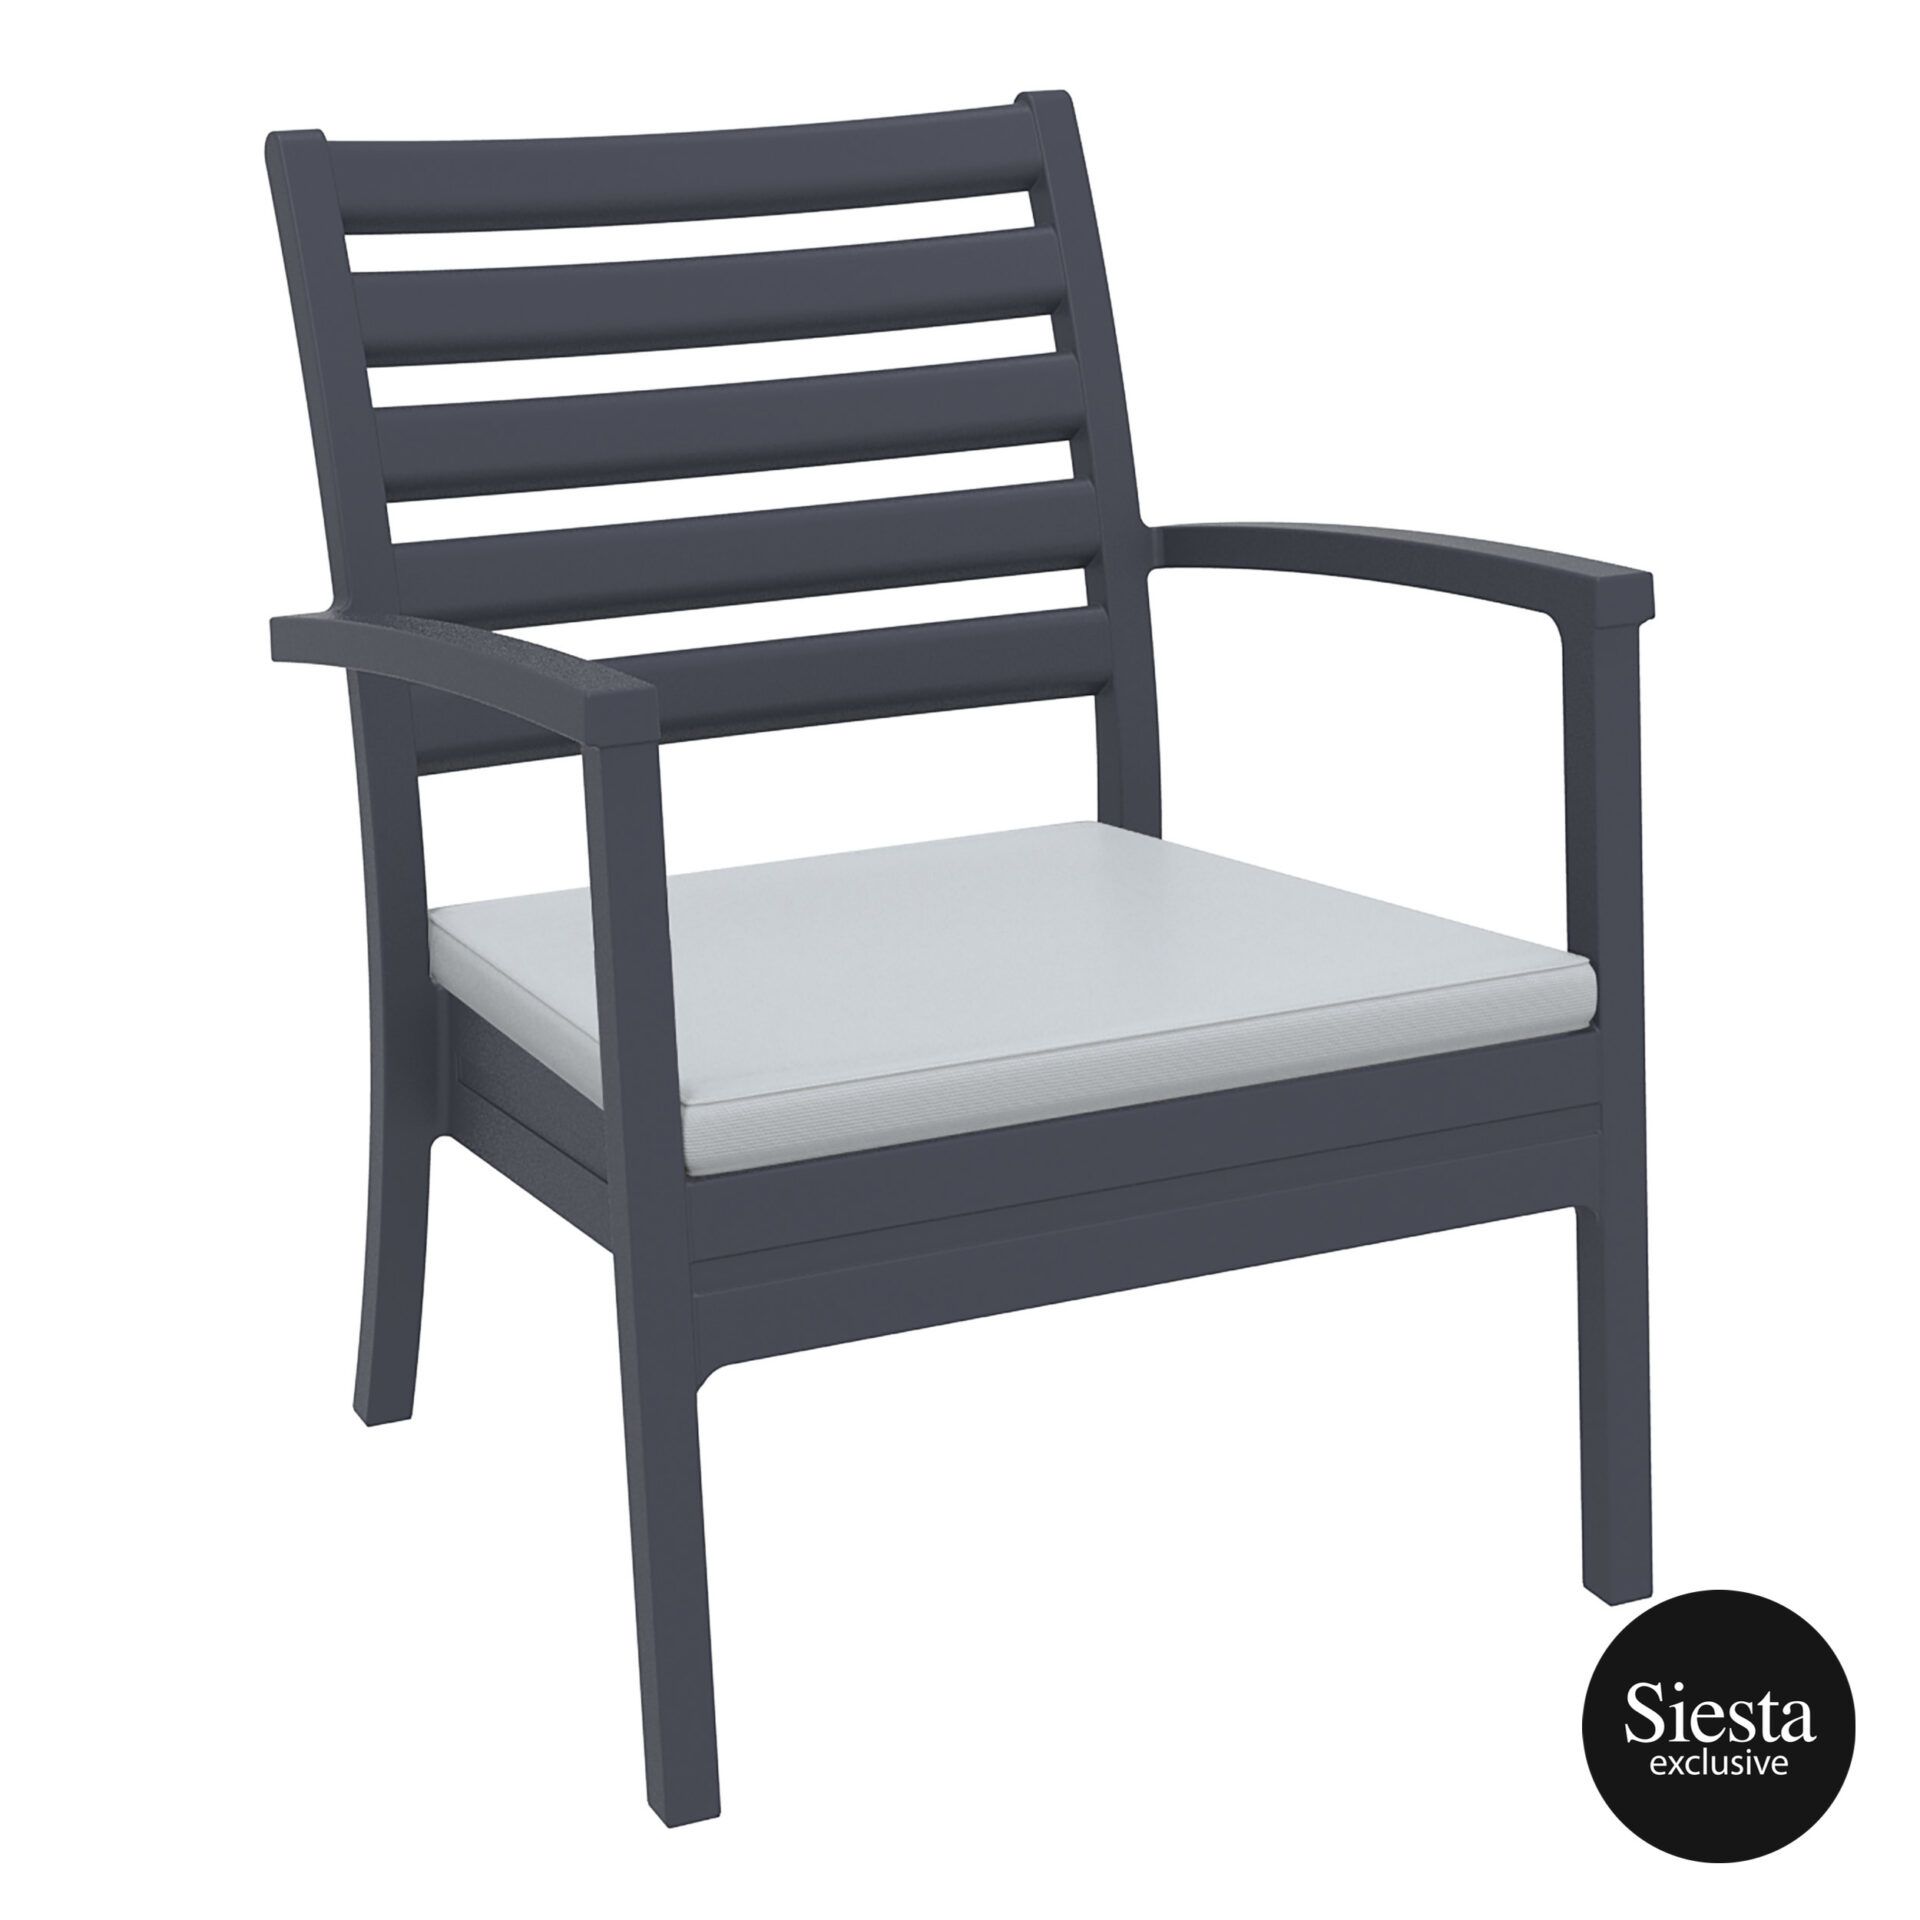 Artemis XL Armchair - Anthracite with Light Grey Seat Cushion